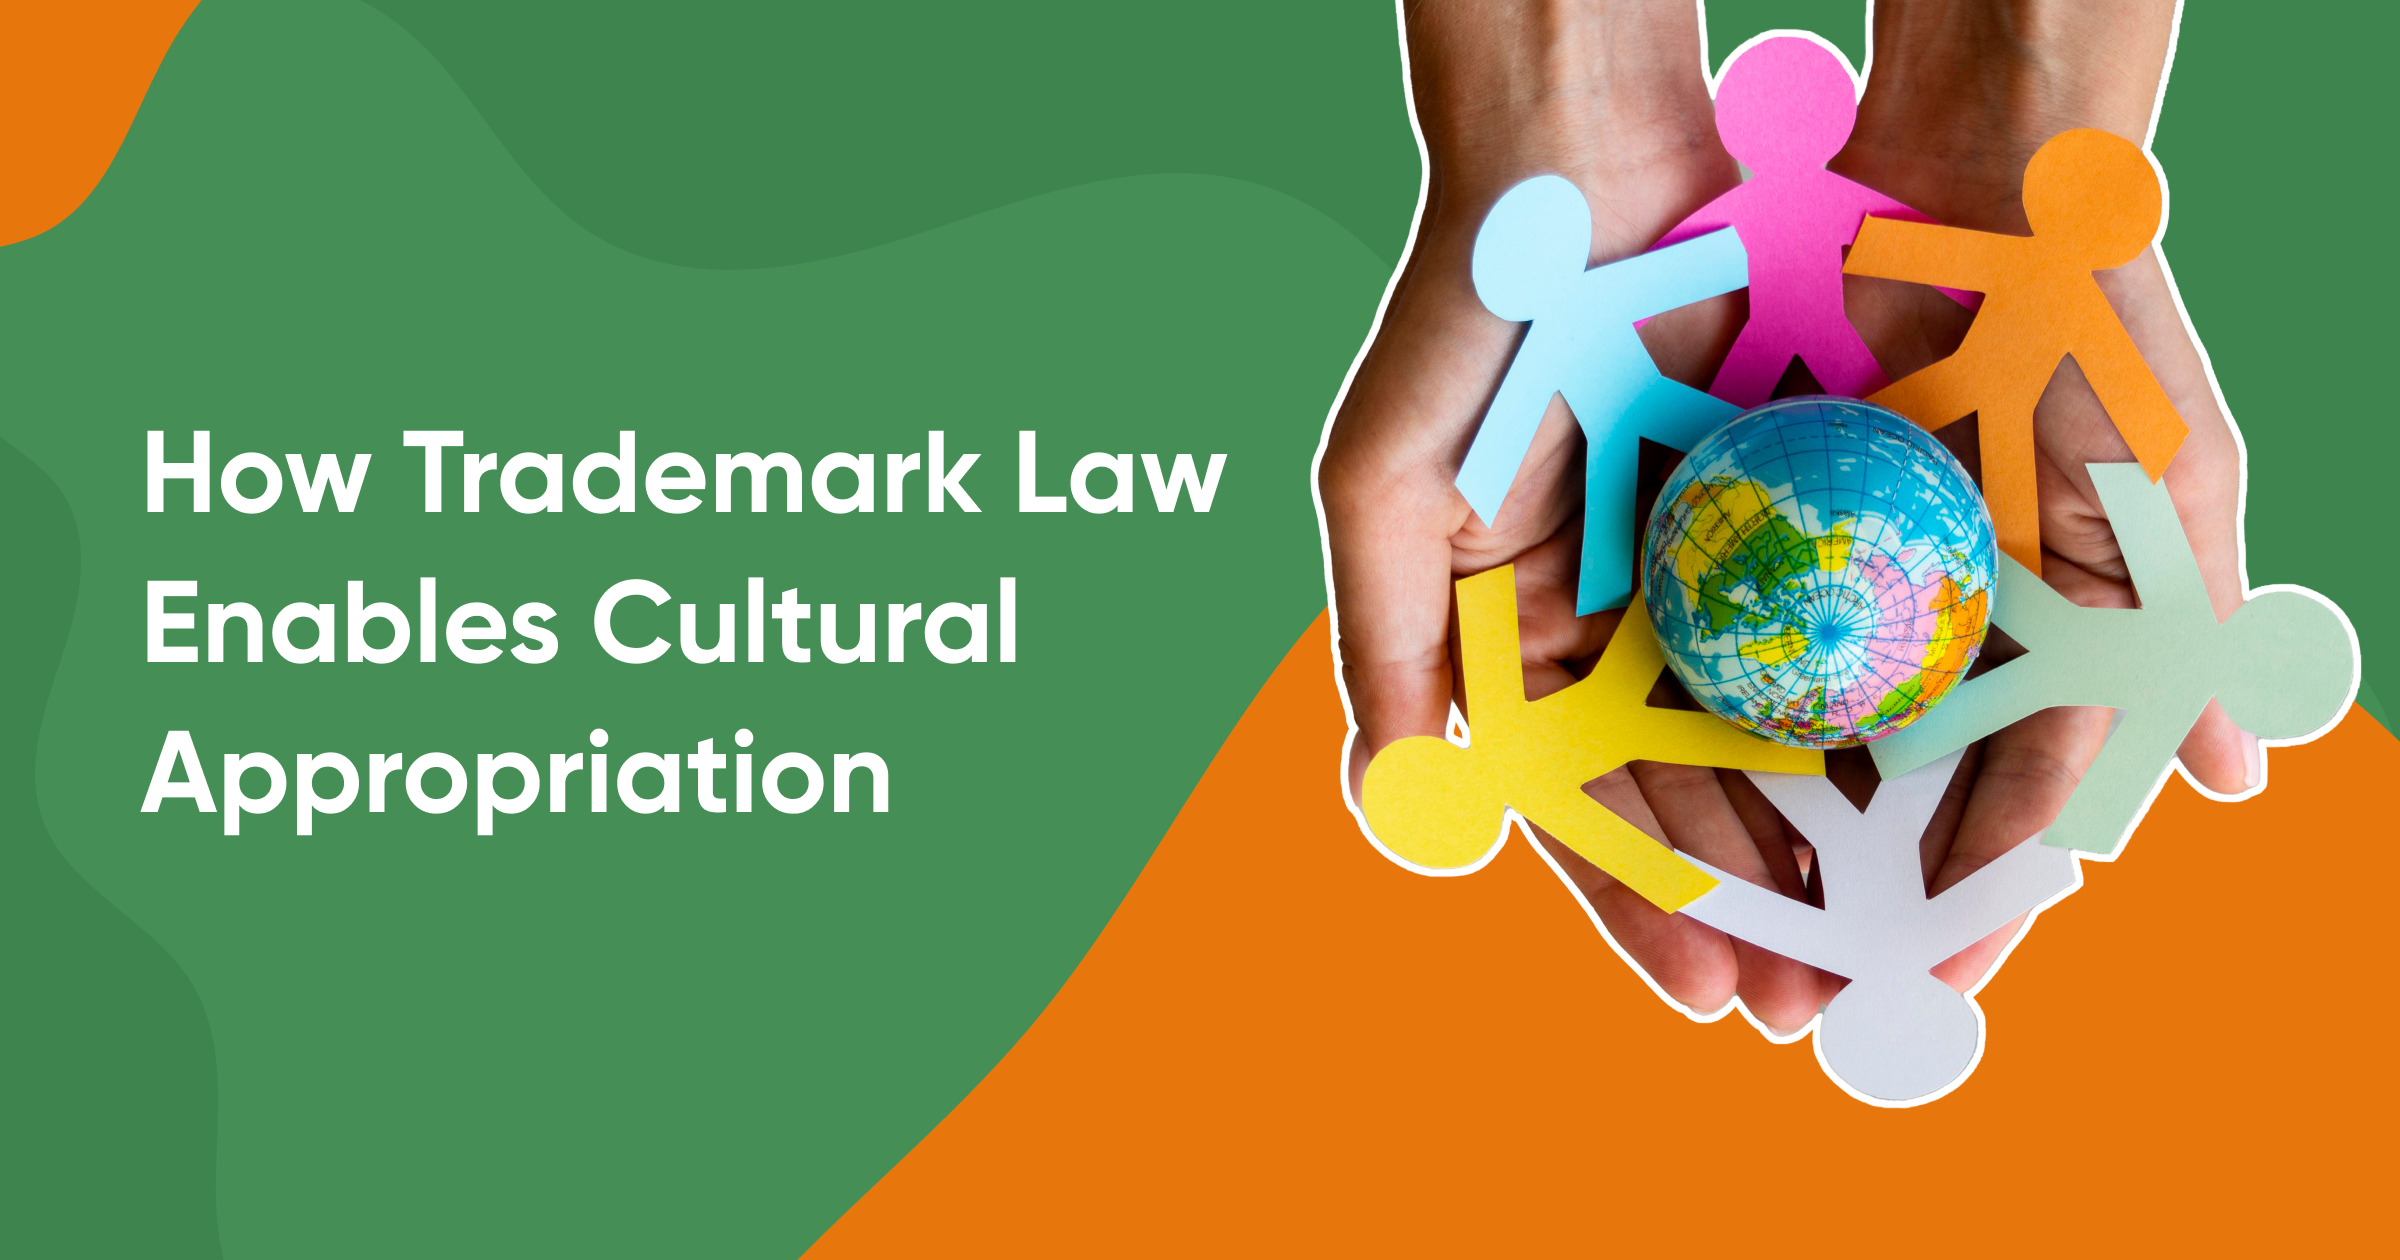 How trademark law enables cultural appropriation